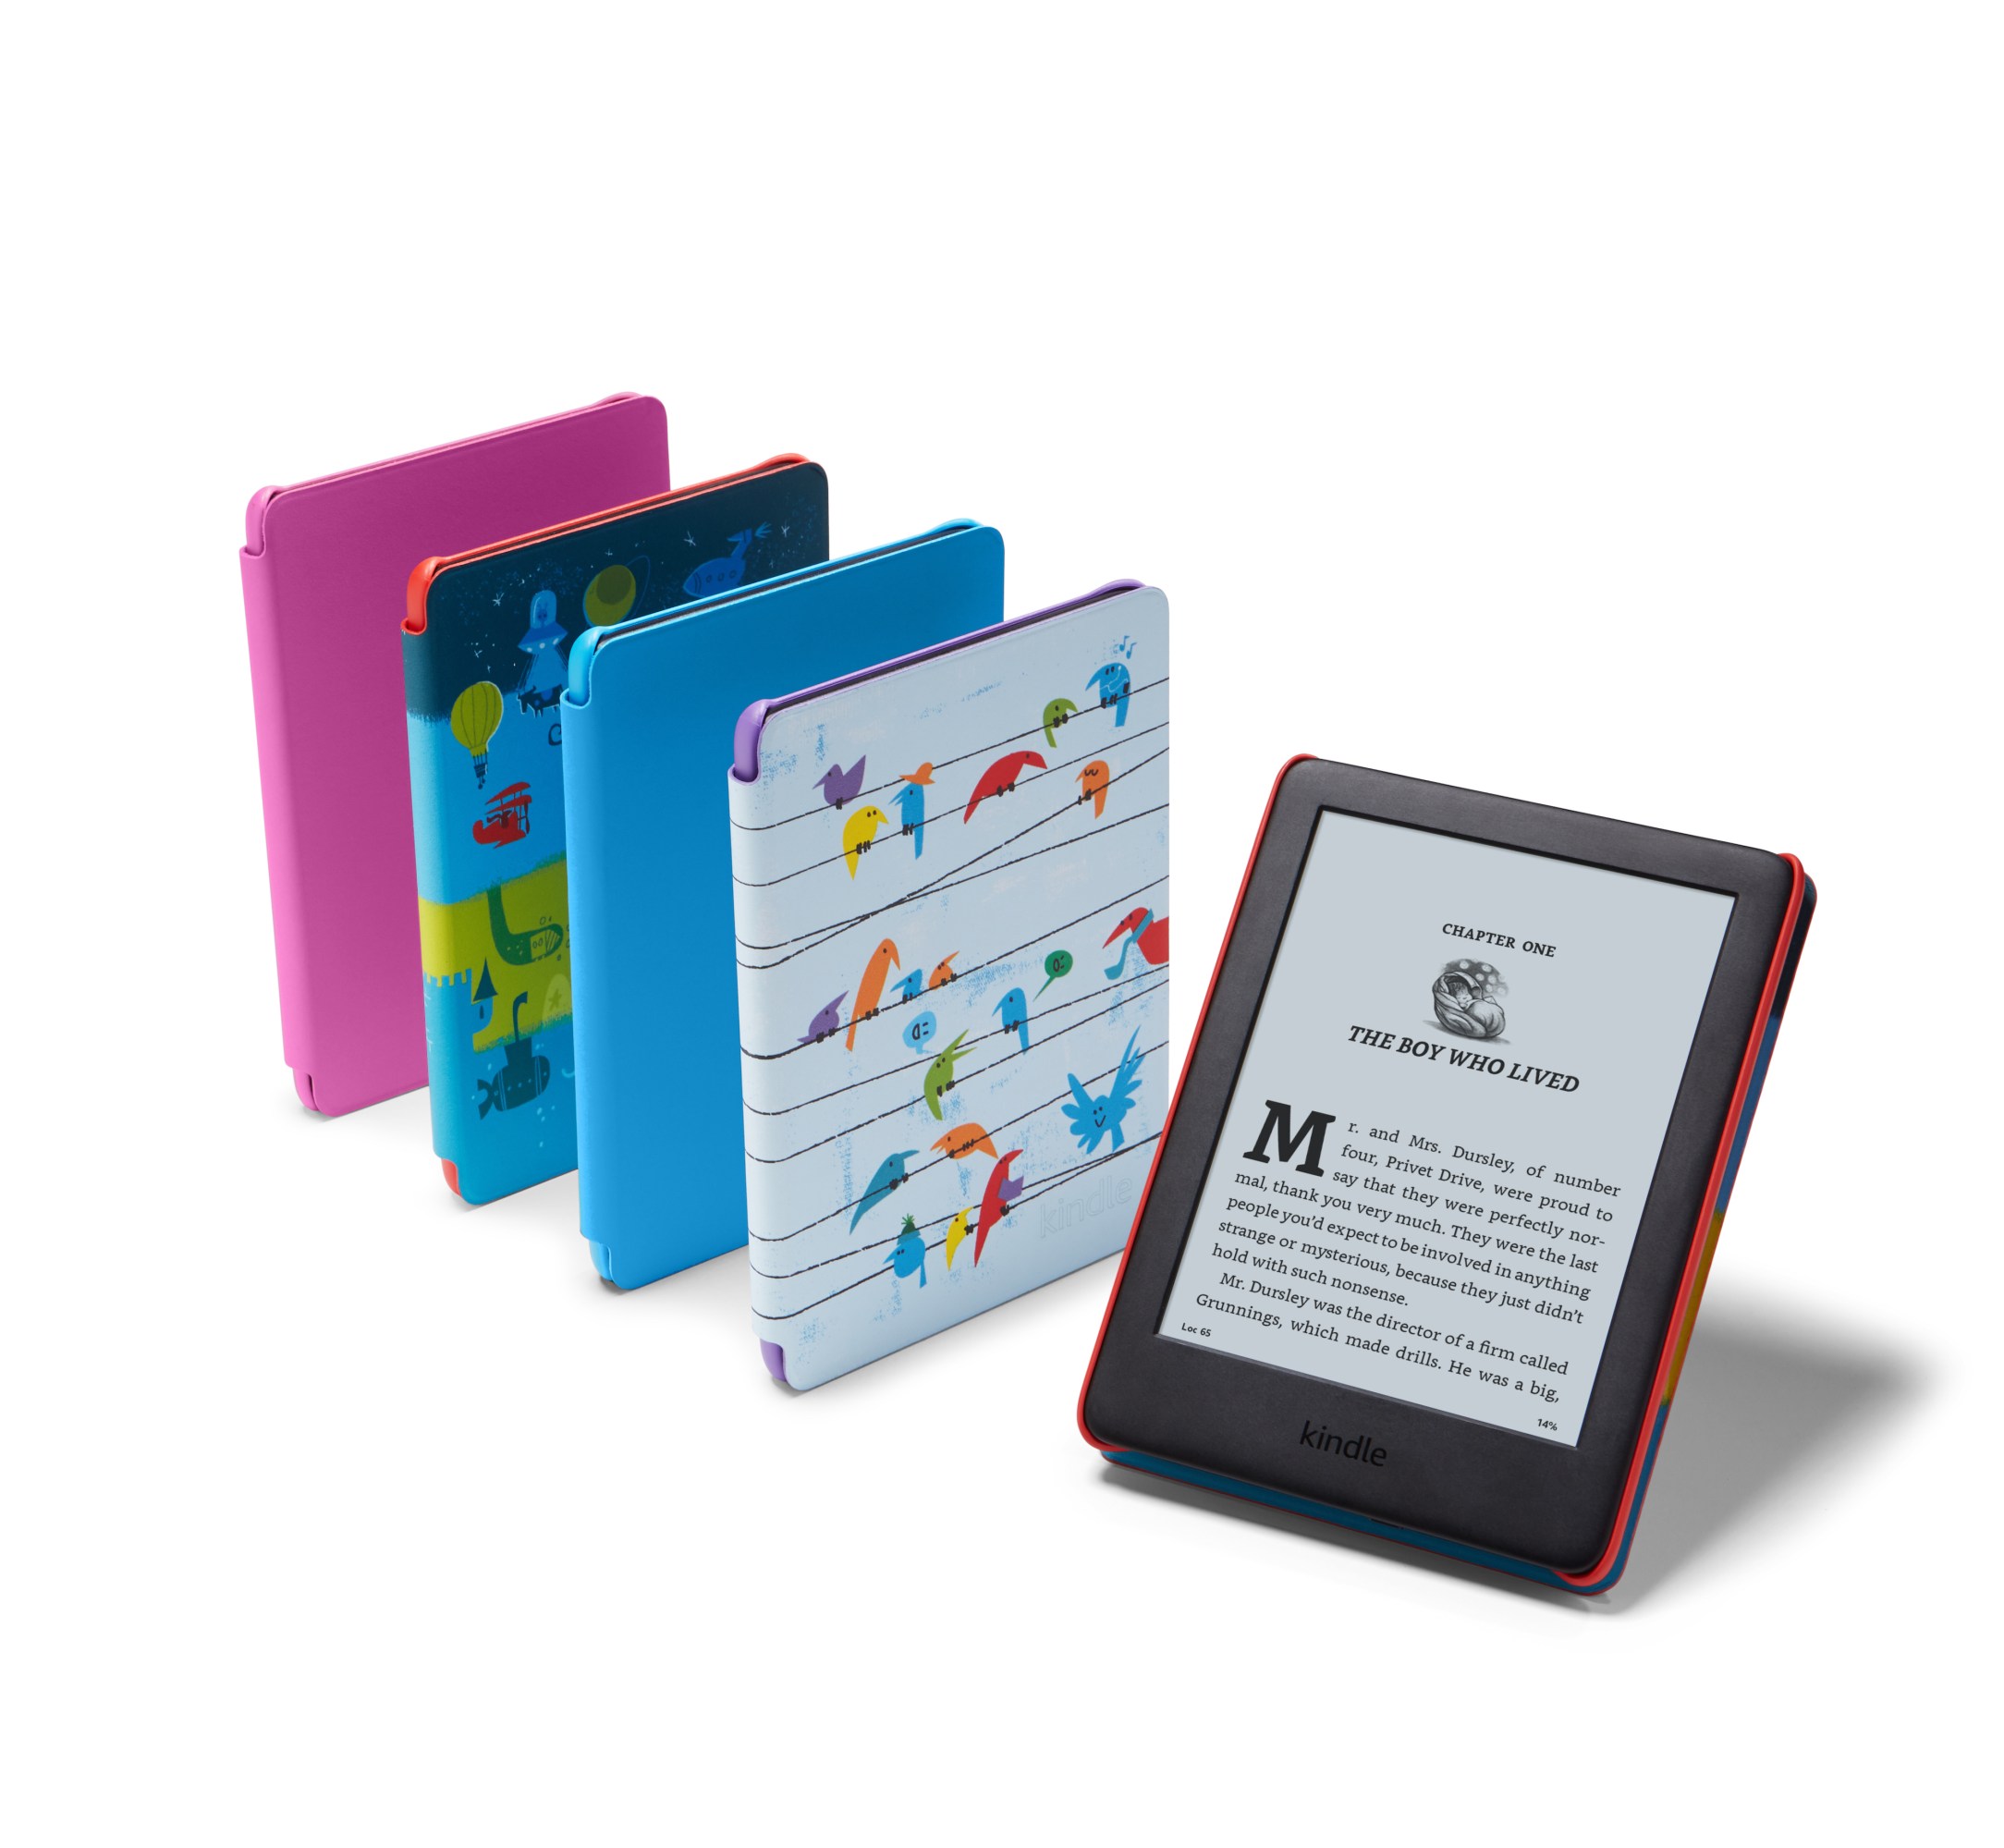 s new Kindle for Kids is probably not as good for kids as real books